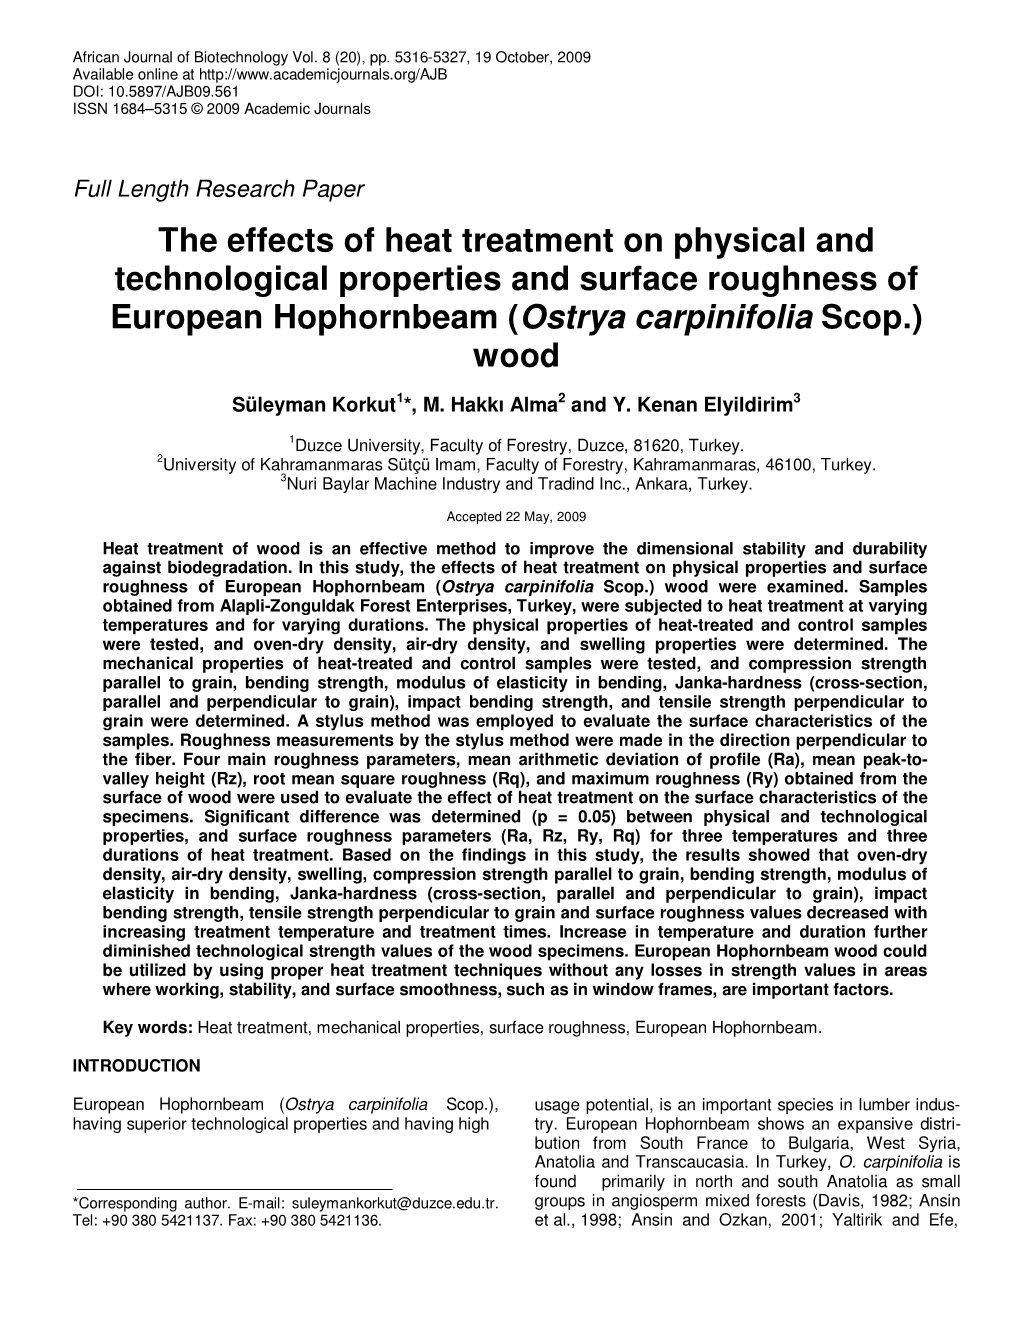 The Effects of Heat Treatment on Physical and Technological Properties and Surface Roughness of European Hophornbeam ( Ostrya Carpinifolia Scop.) Wood